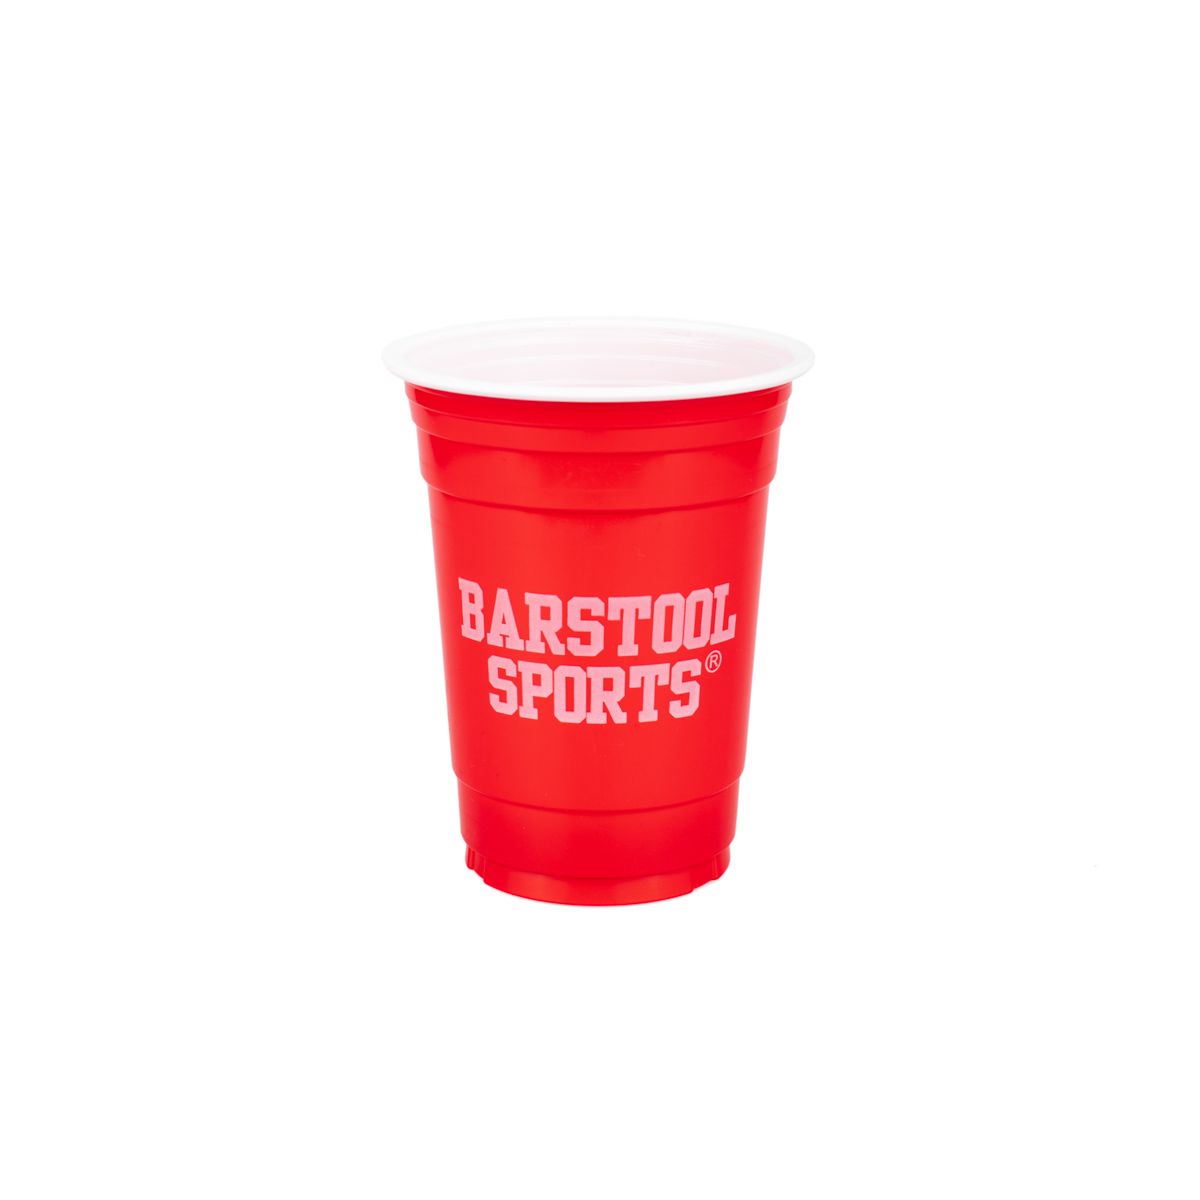 Barstool Sports Logo Party Cups - 14 Pack-Drinkware-Barstool Sports-Red-One Size-Barstool Sports